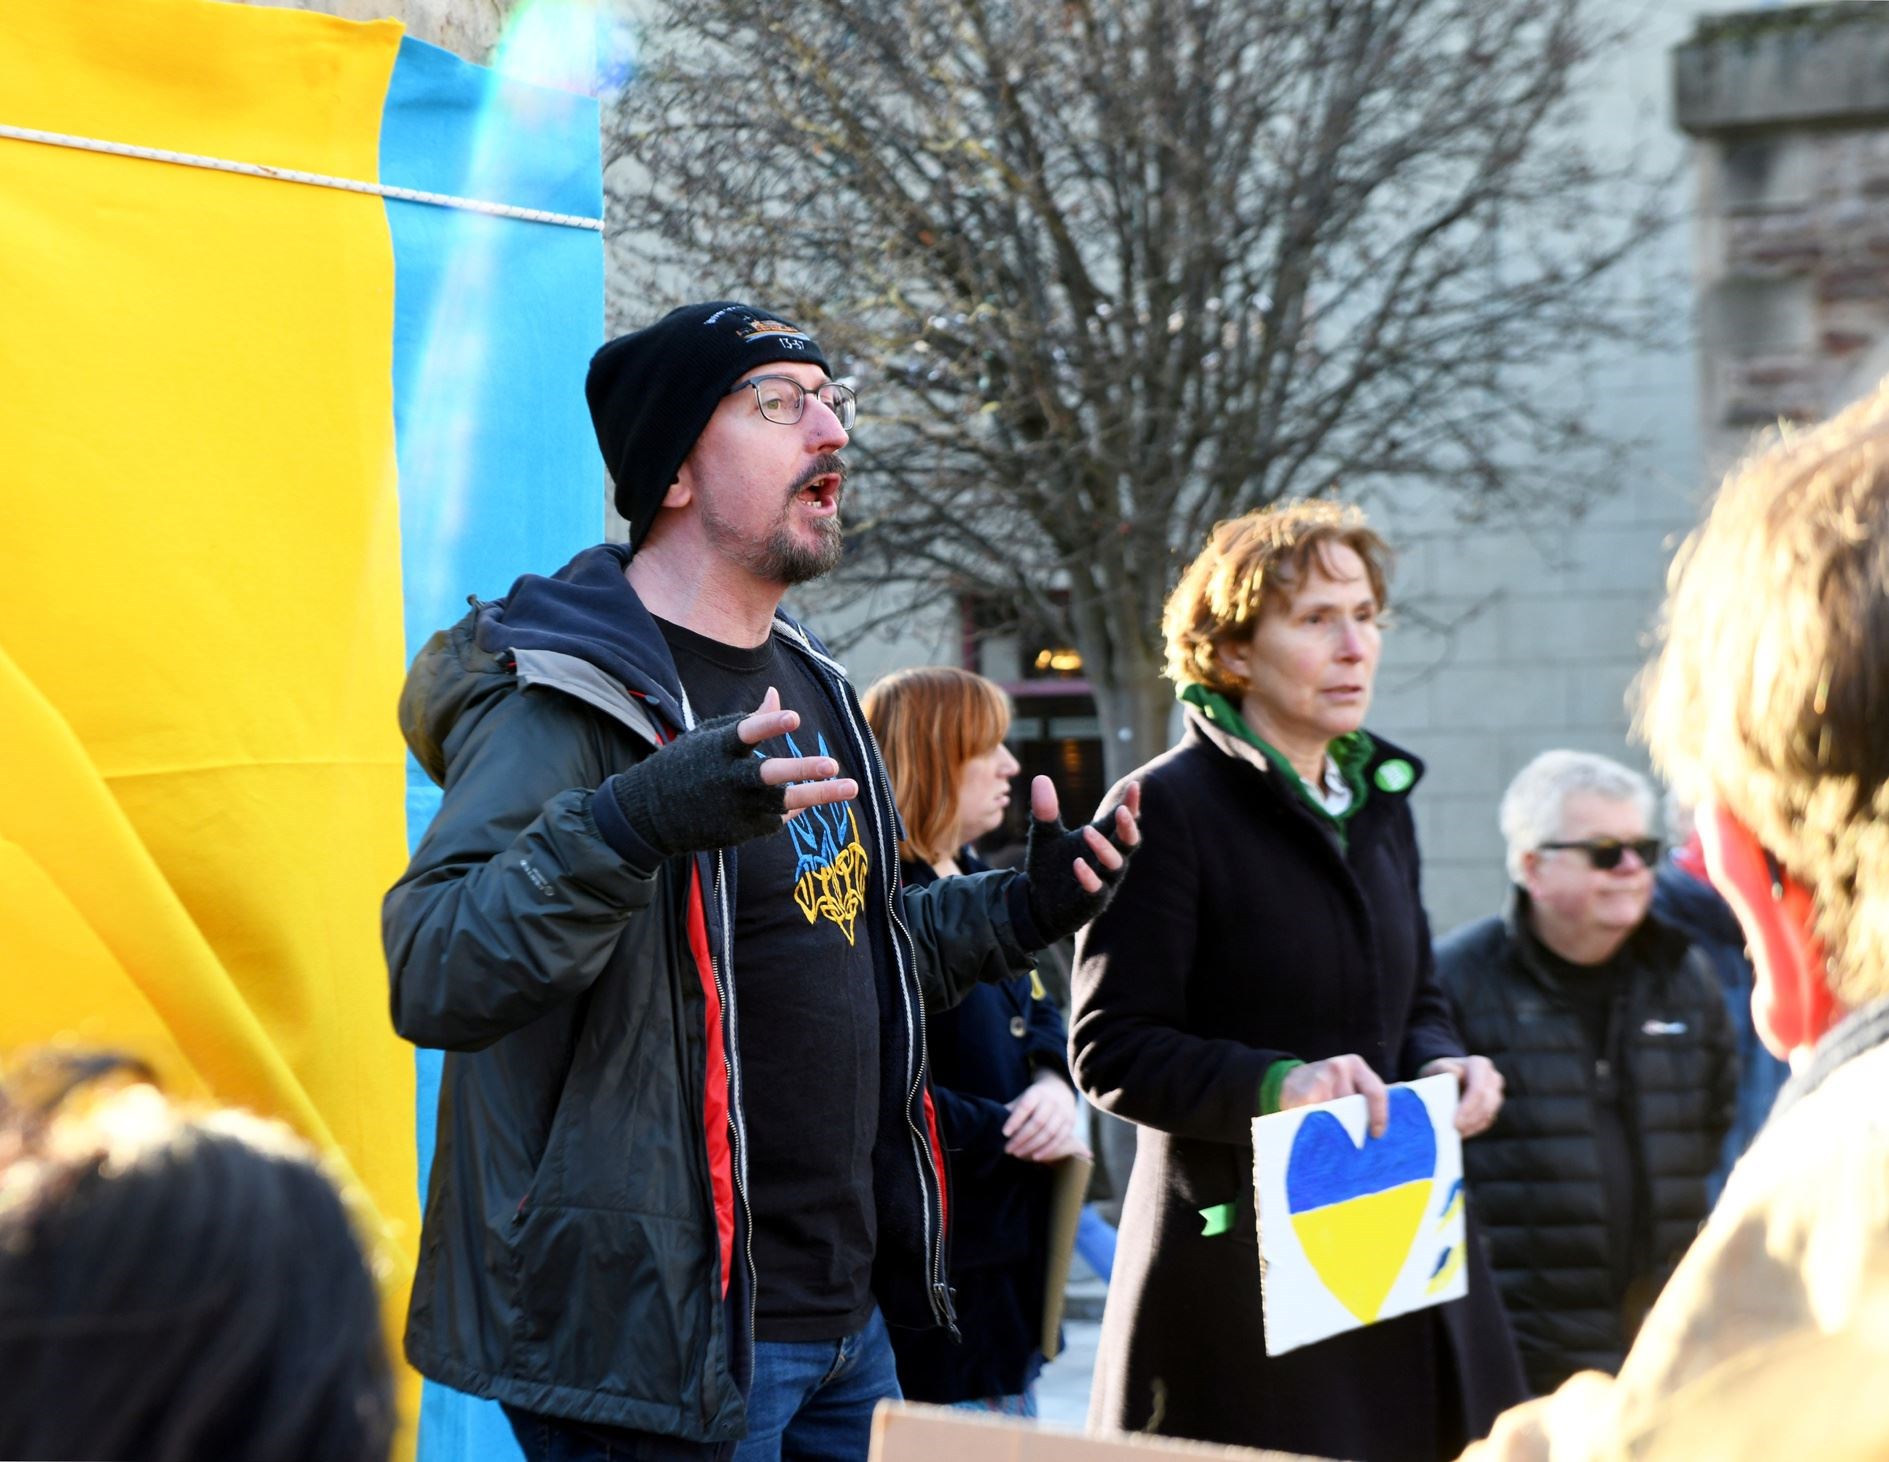 Gavin Roach makes a point during the peaceful protest. Picture: James Mackenzie.